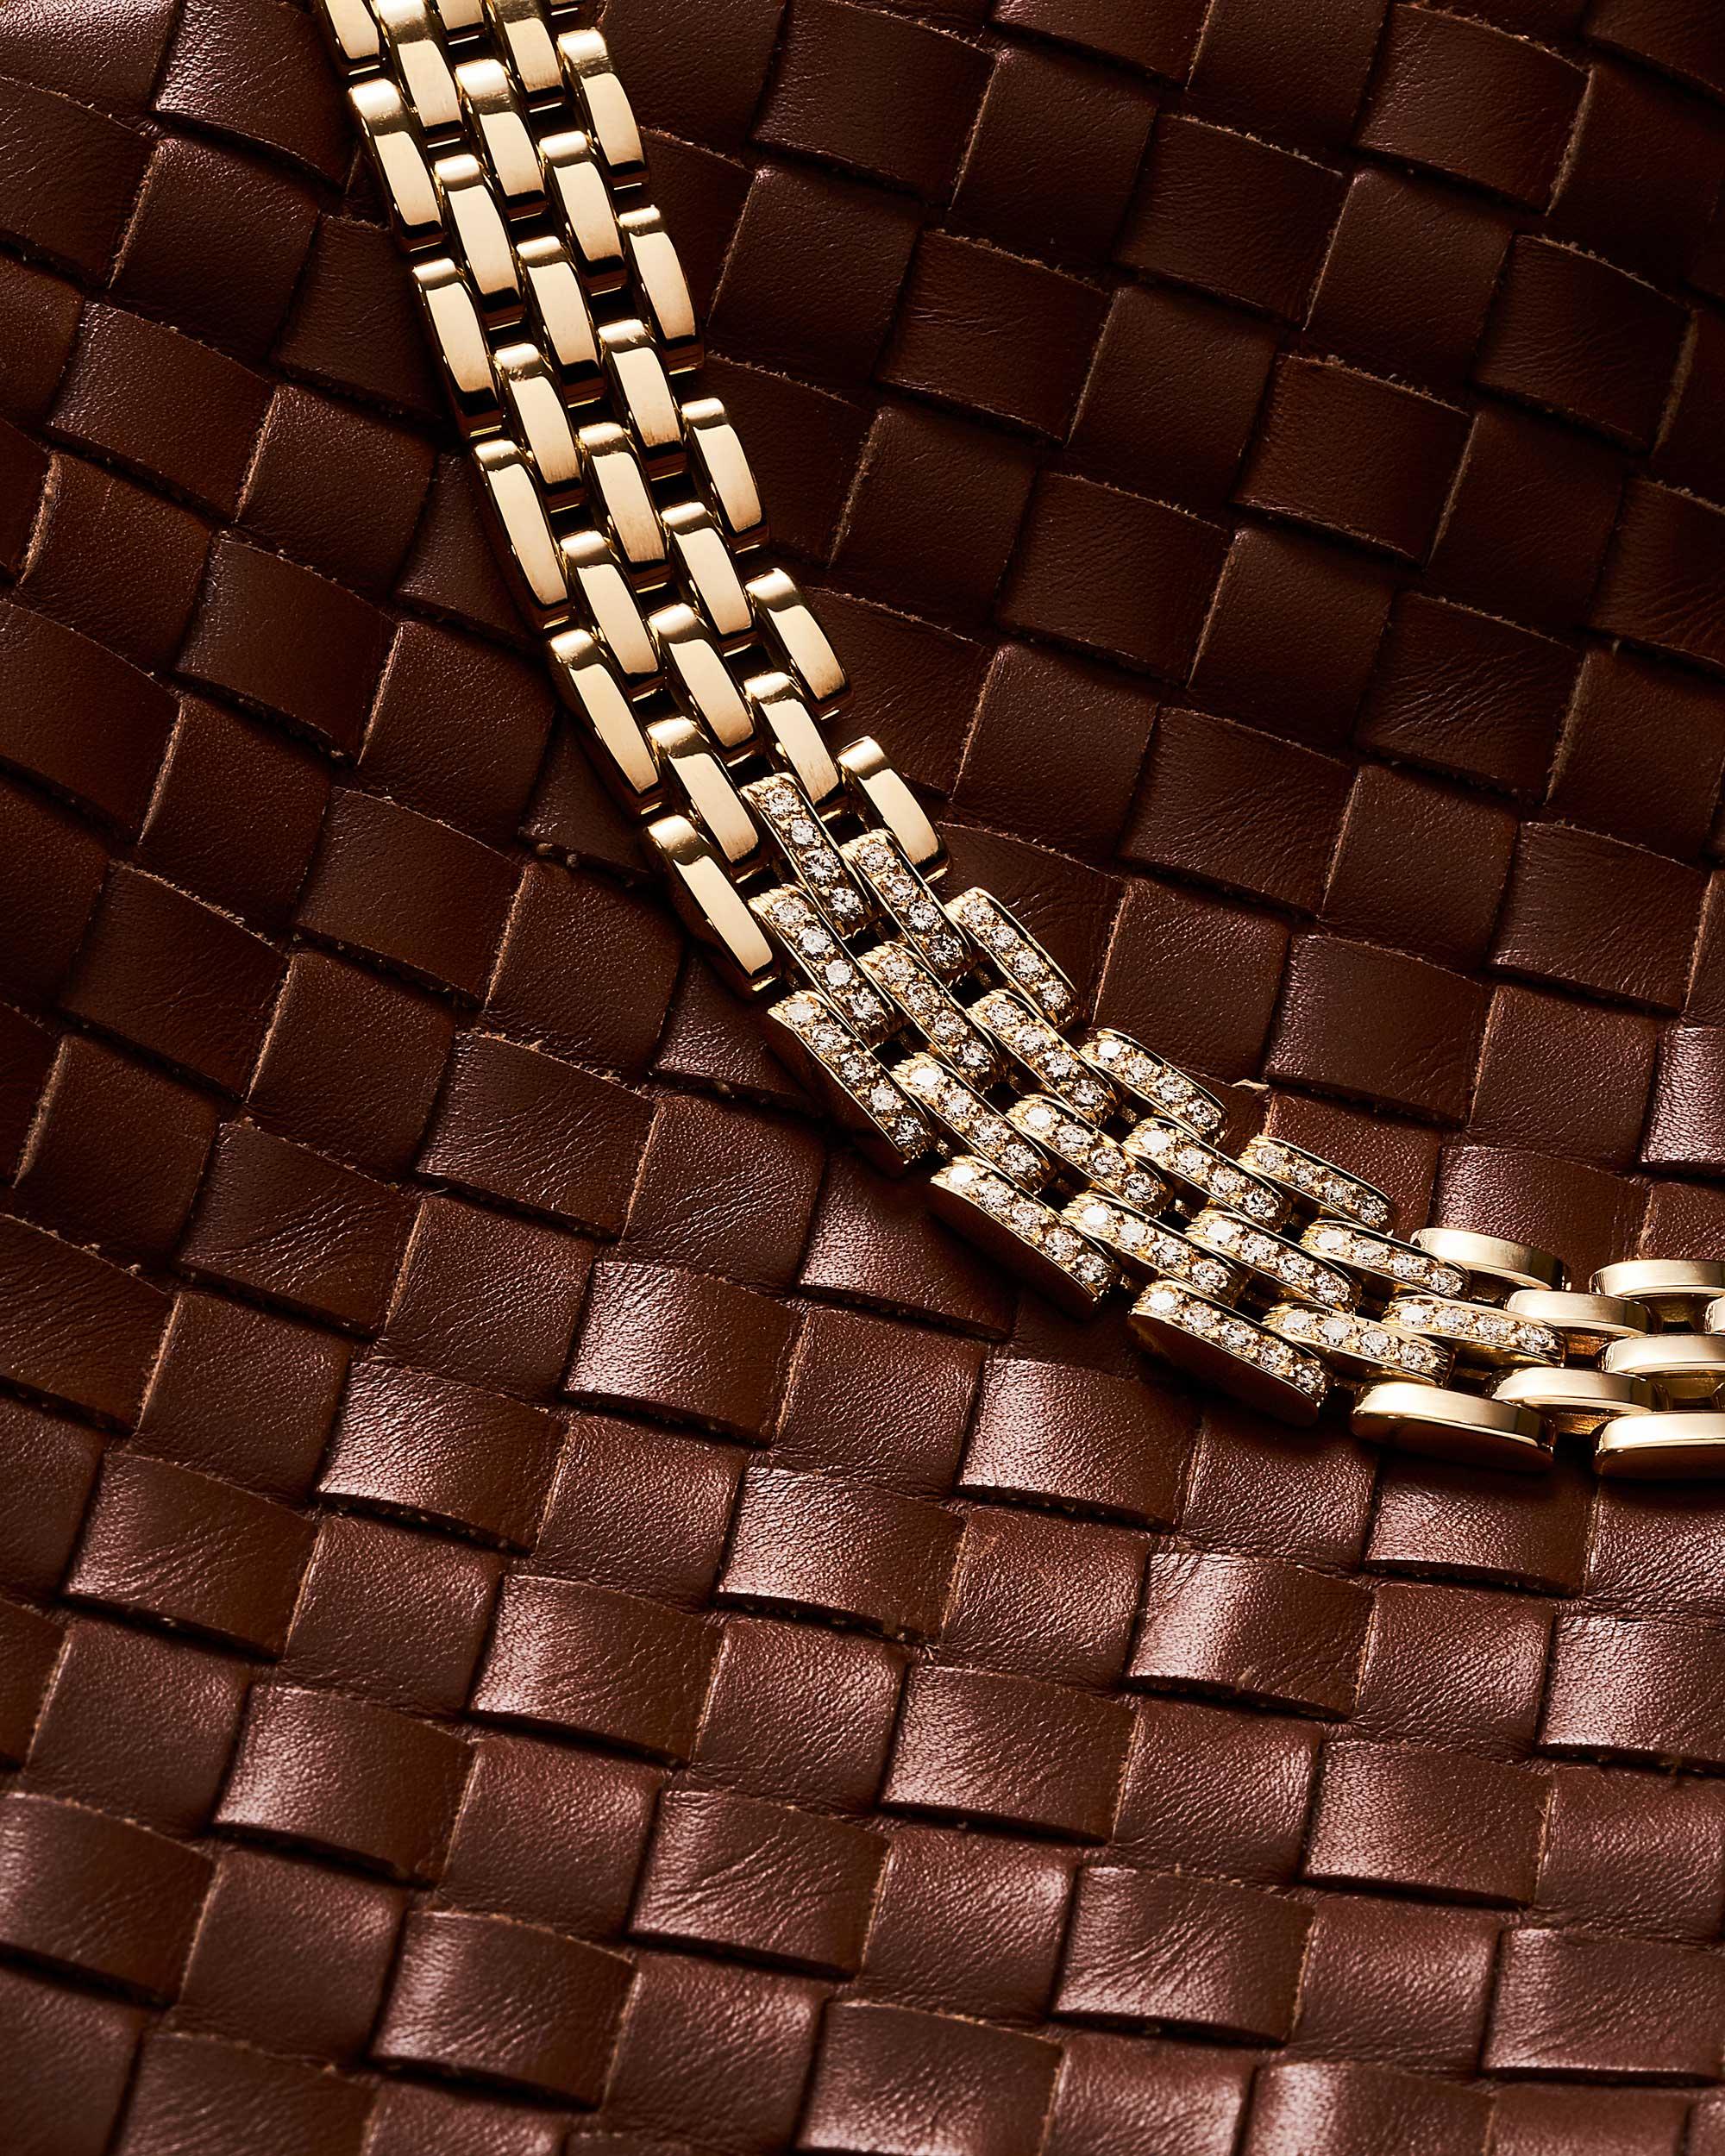 The Cartier Panthère Collier is a timeless and iconic piece of jewelry that epitomizes the luxury and sophistication for which Cartier is renowned. The Panthère collection has been an integral part of Cartier's heritage since its inception in the